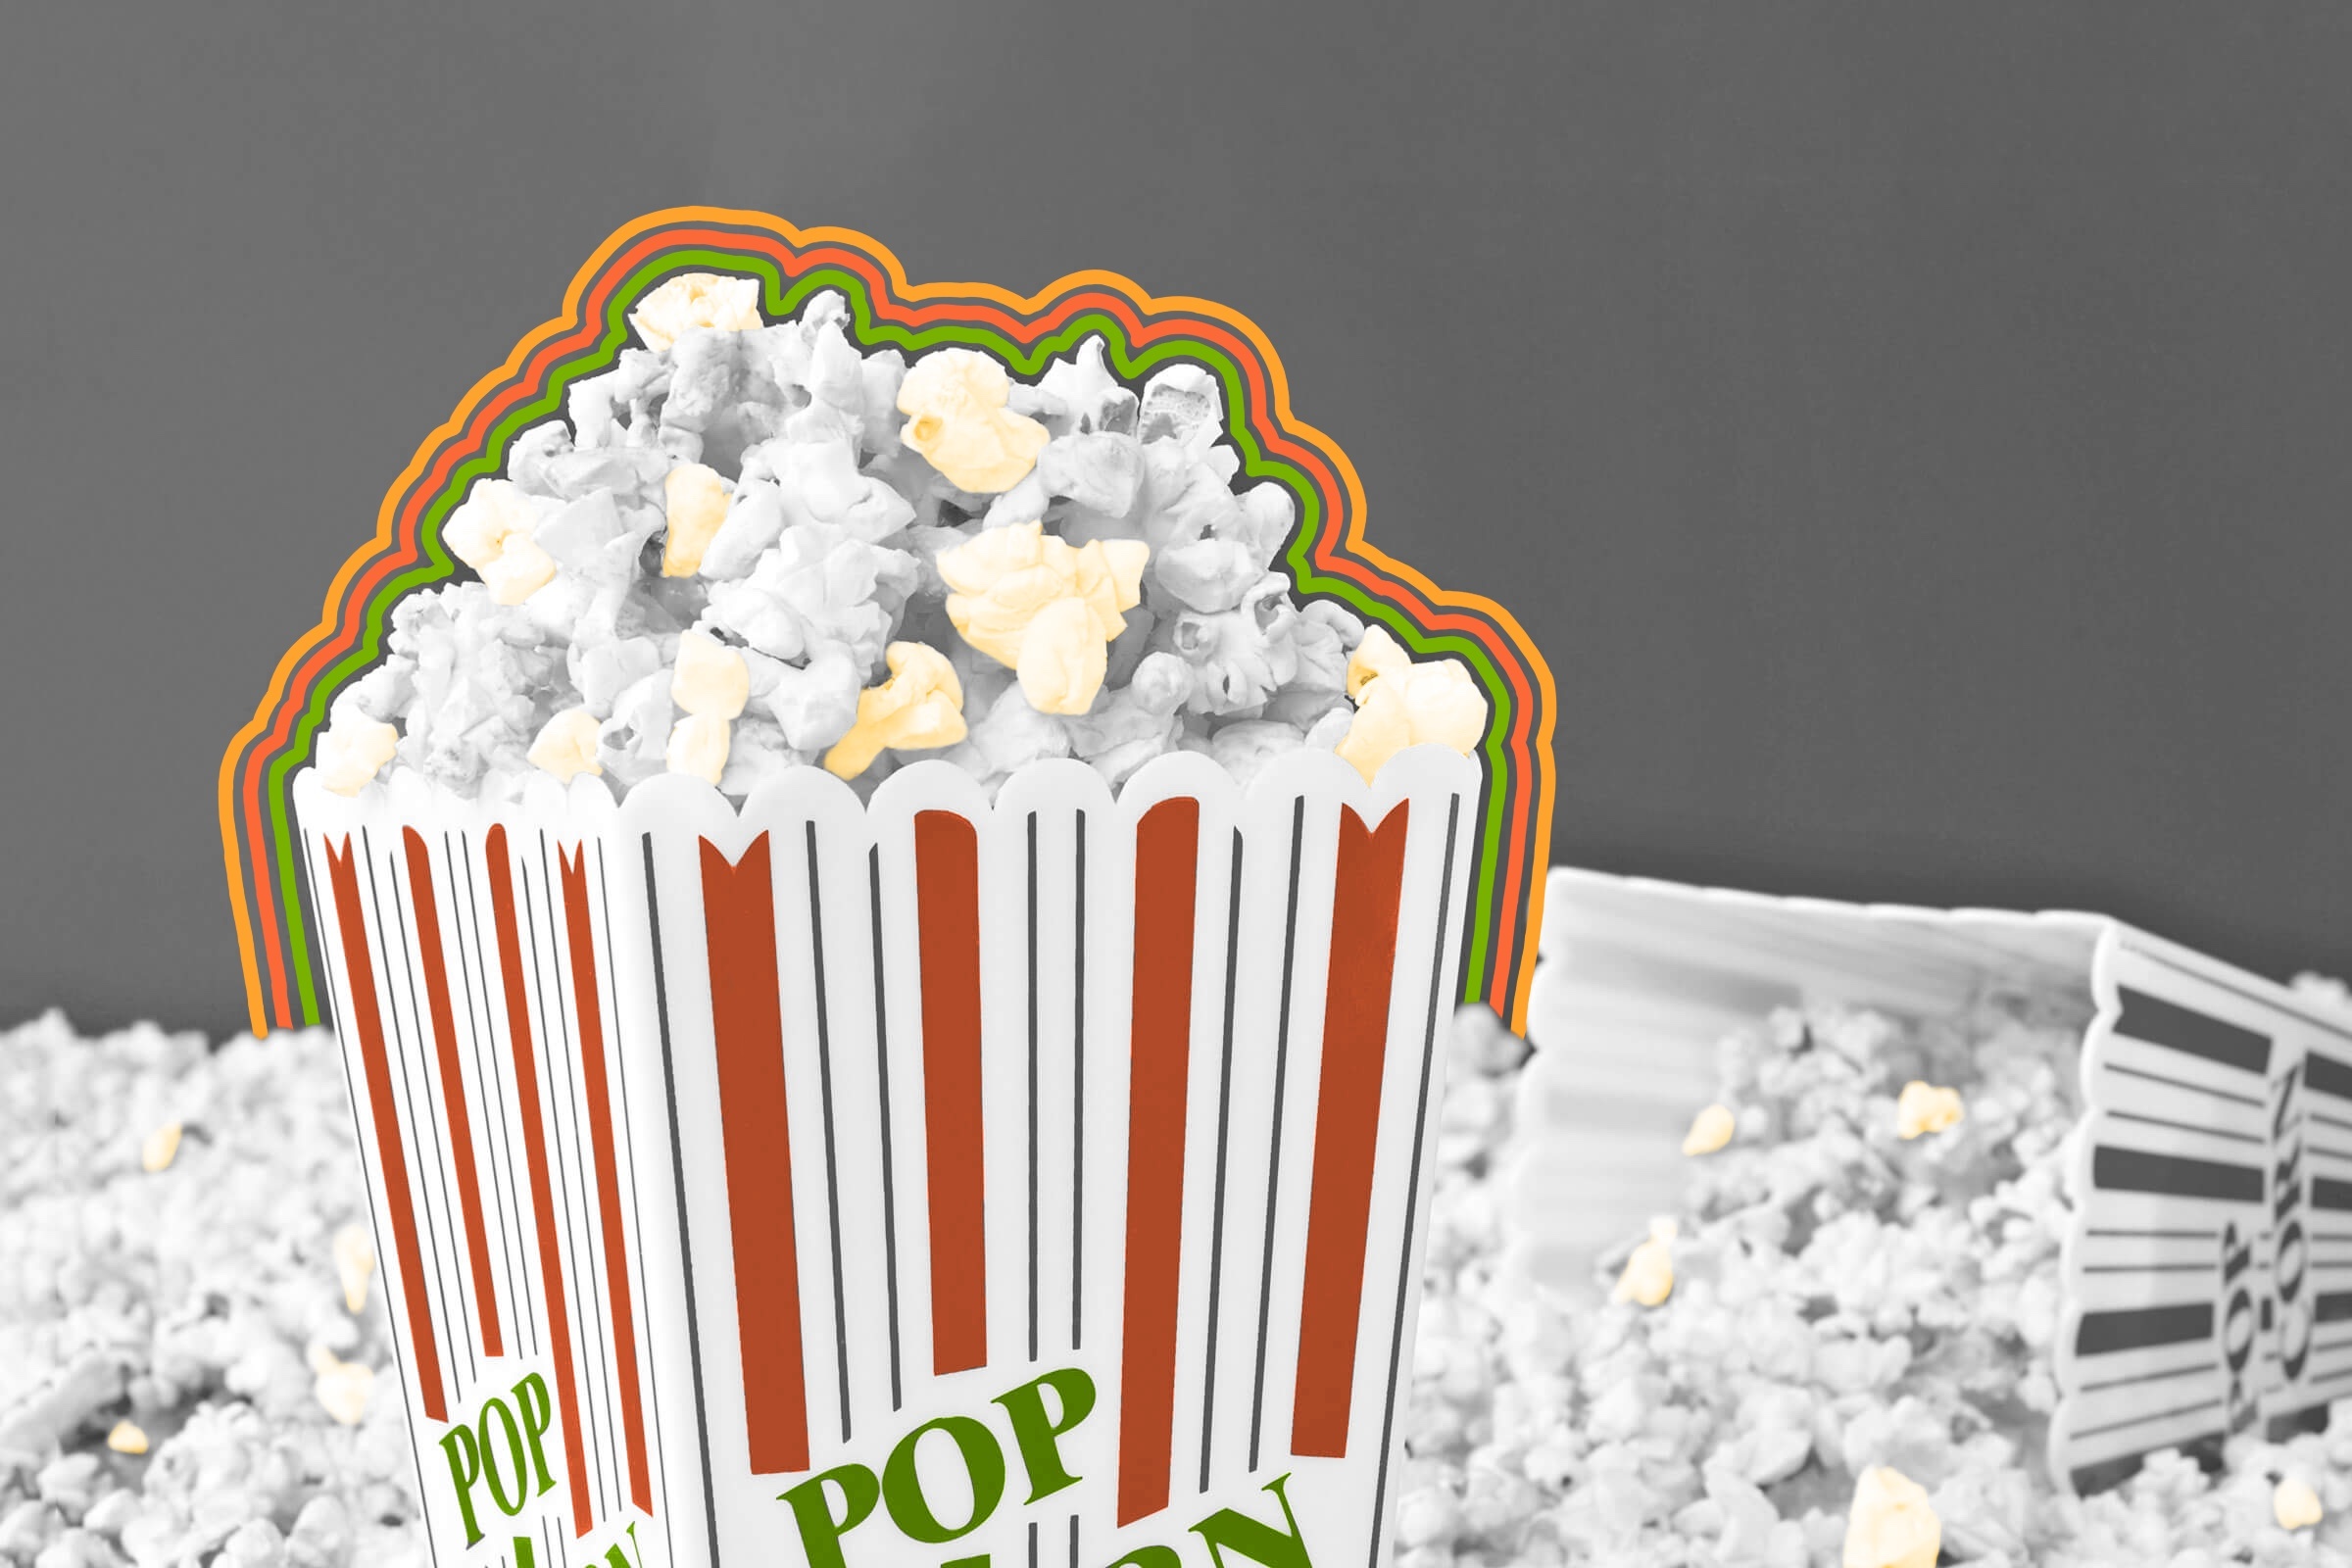 Popcorn can pop up to 3 feet into the air.